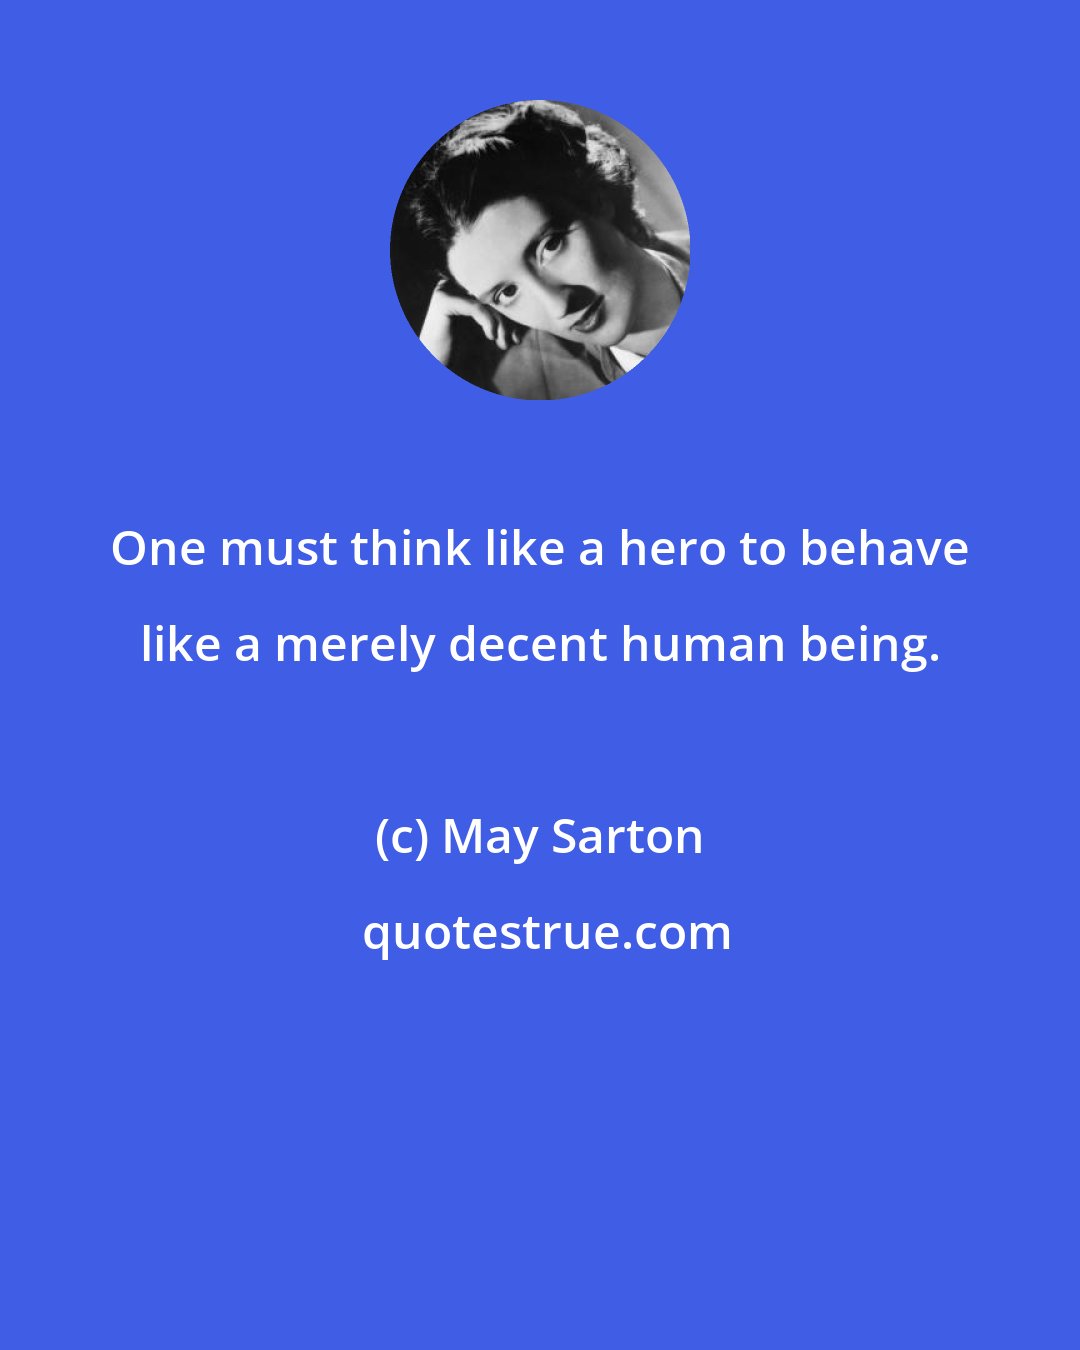 May Sarton: One must think like a hero to behave like a merely decent human being.